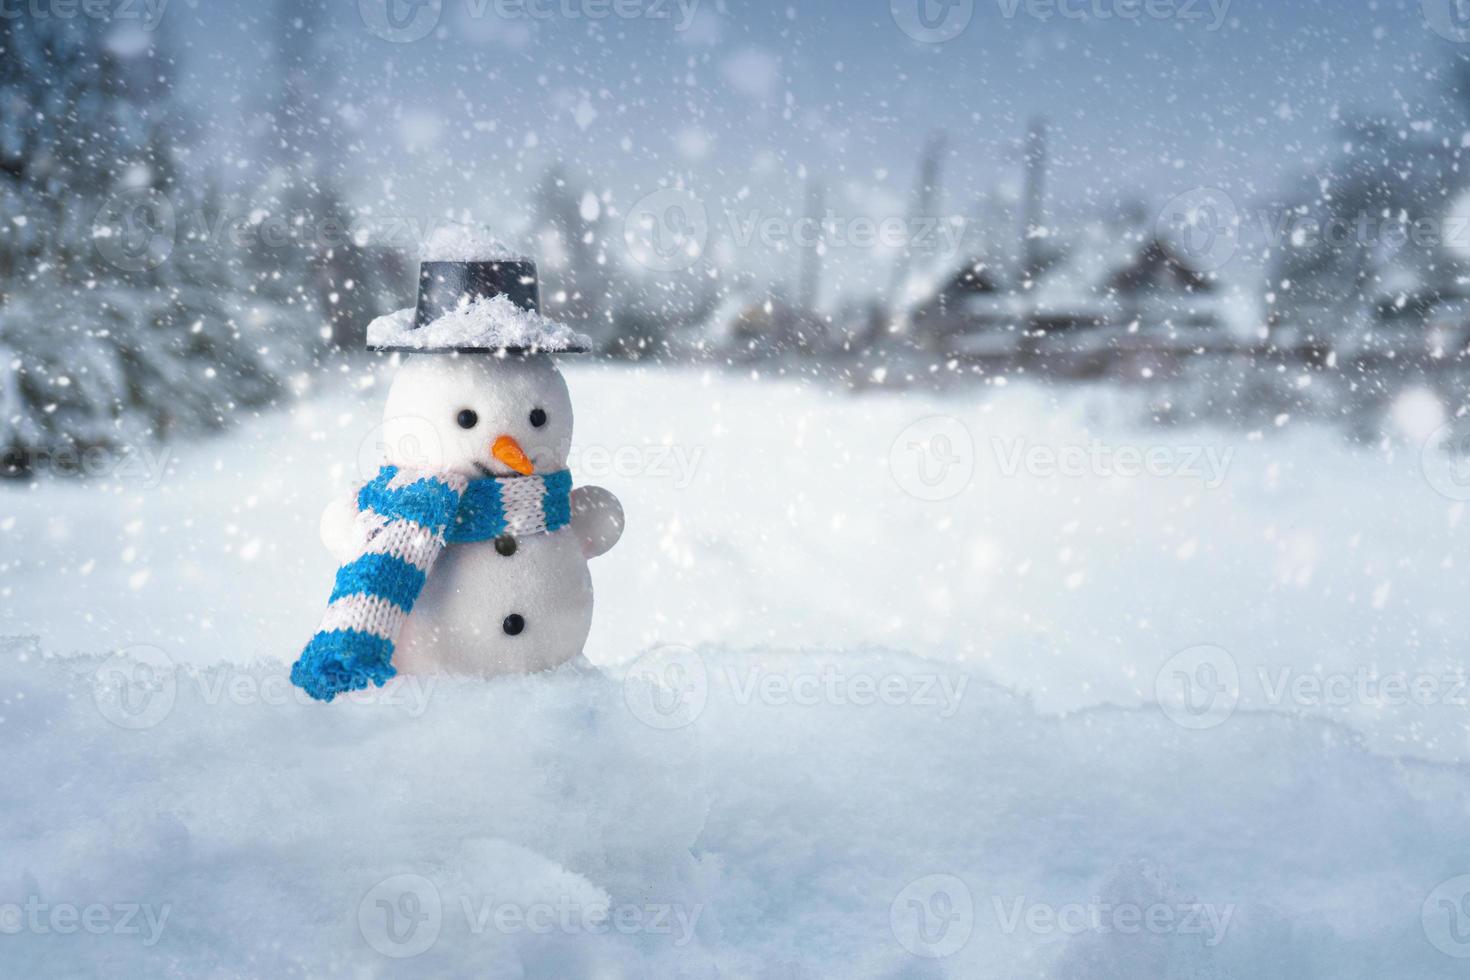 Snowman stands in a snowdrift with a village on the background in snowy evening photo